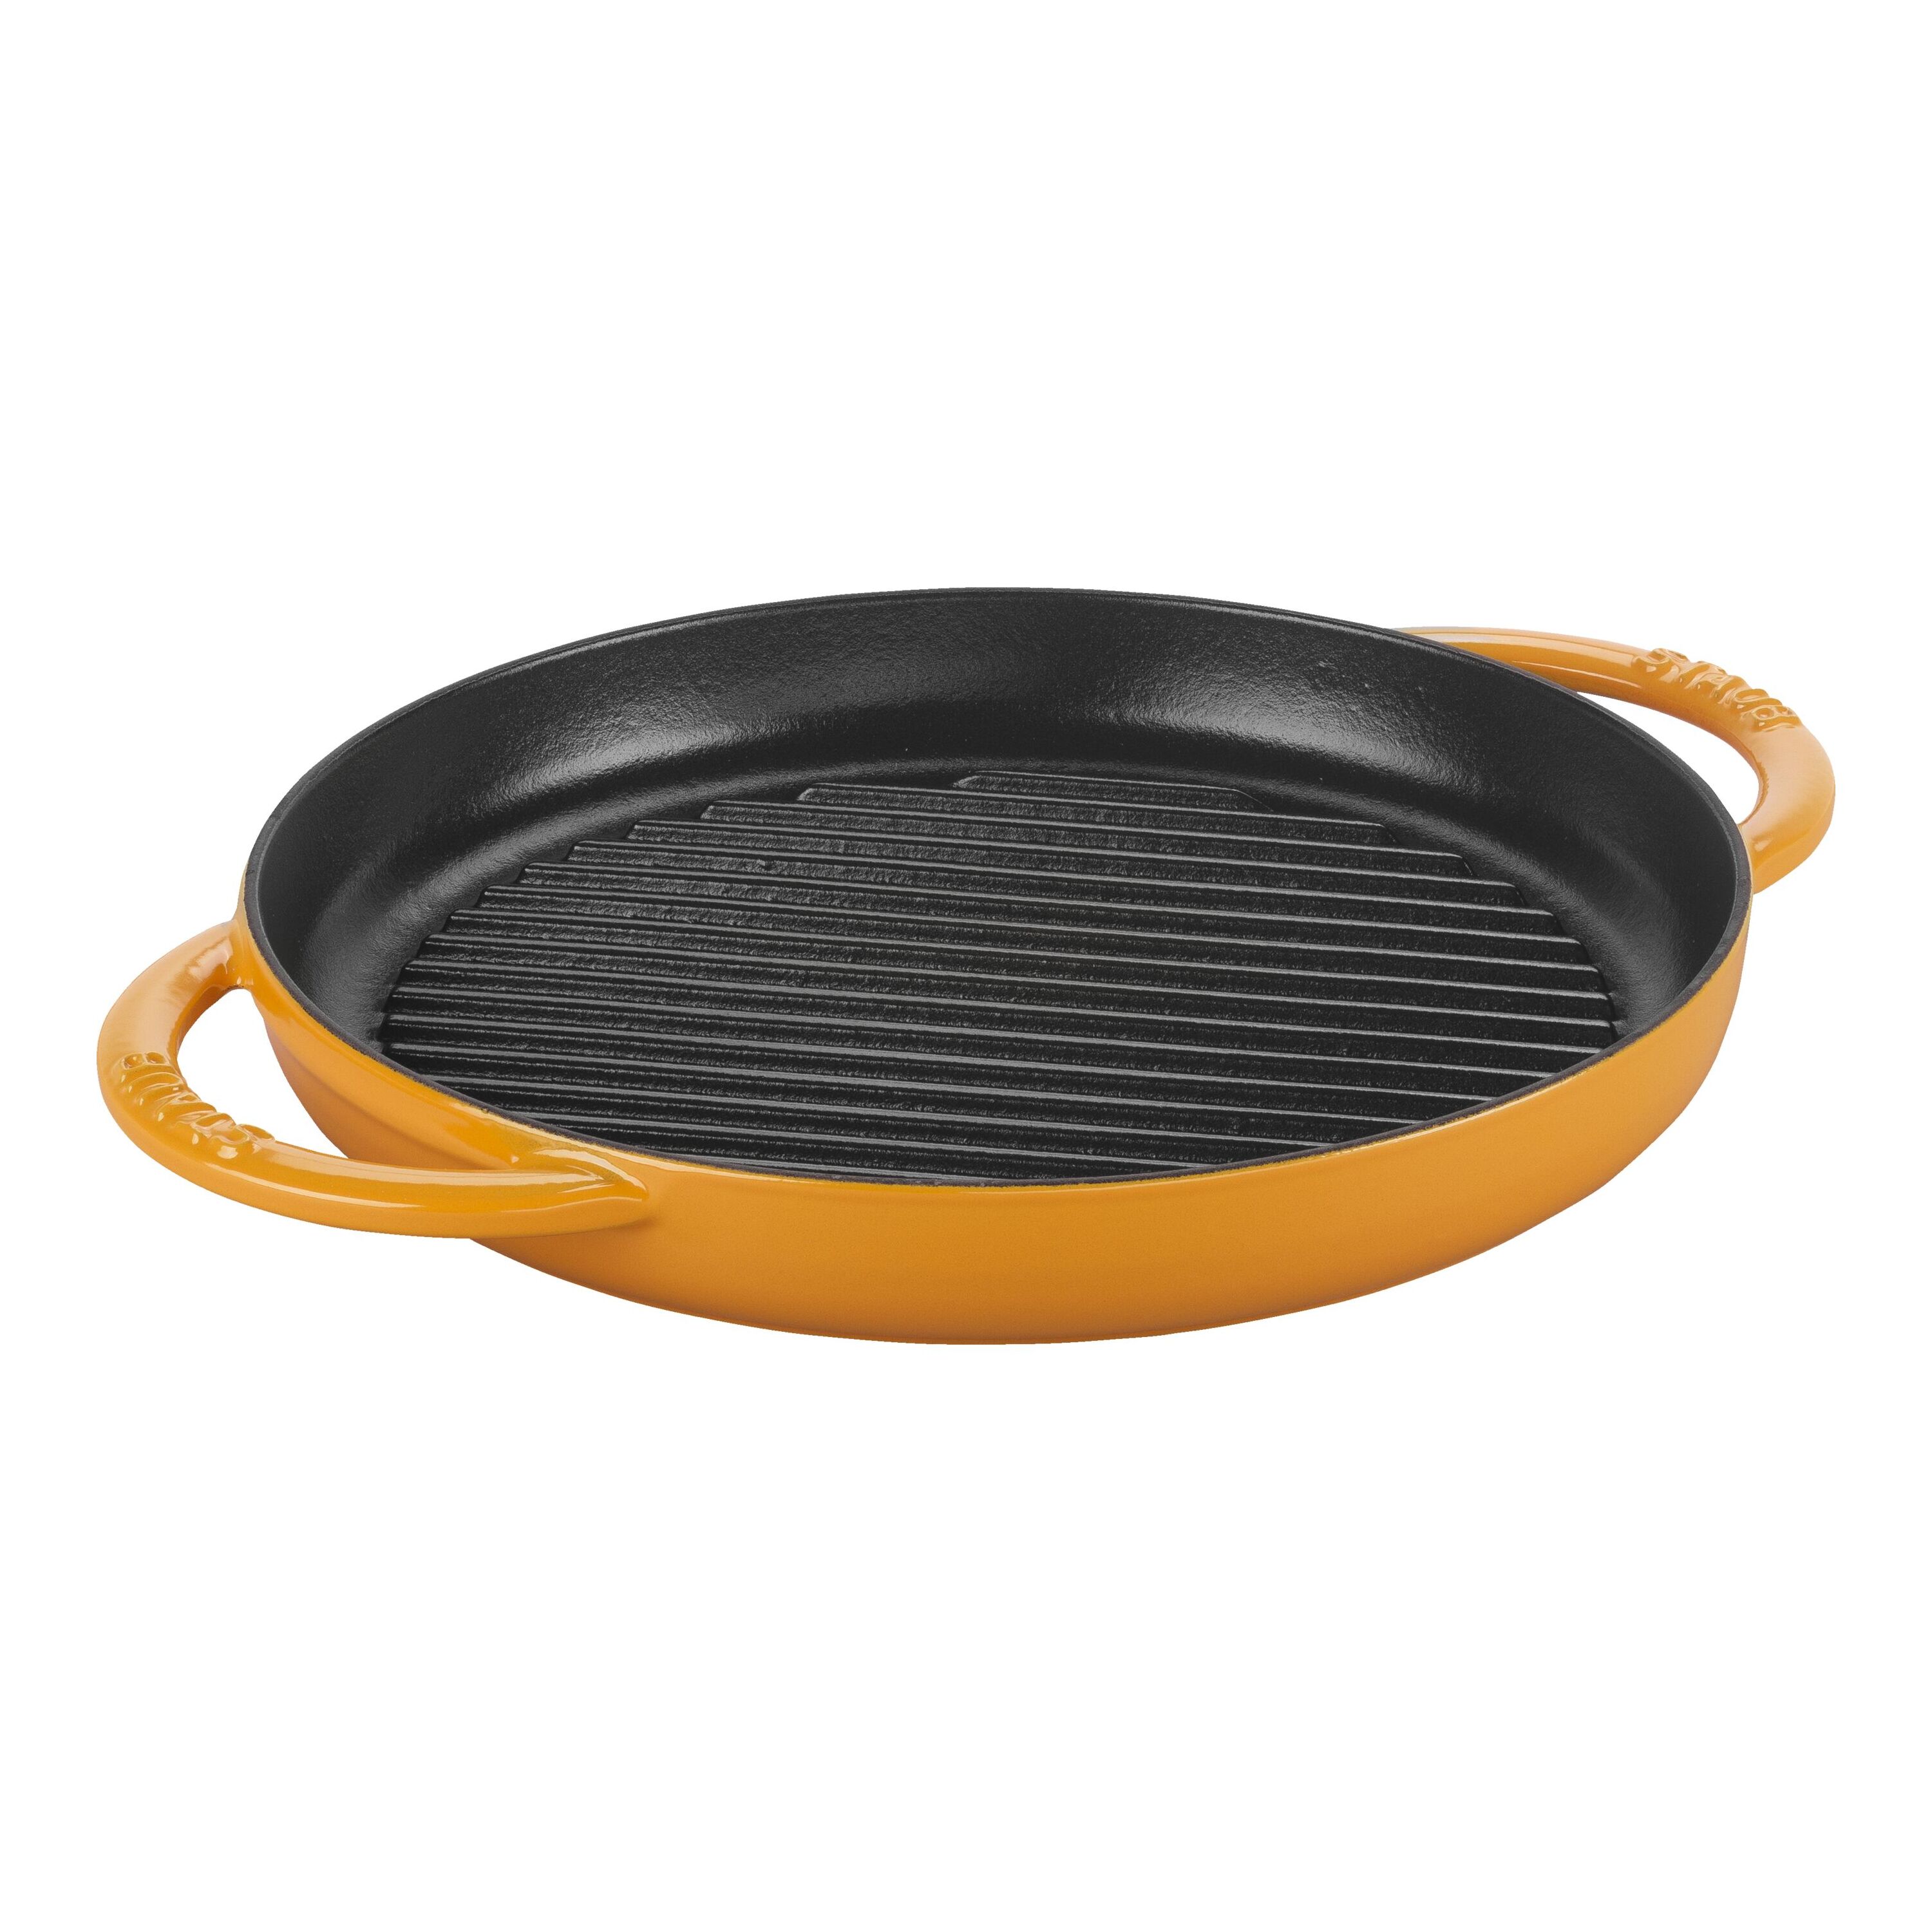 Staub Cast Iron 10-inch Round Double Handle Pure Griddle